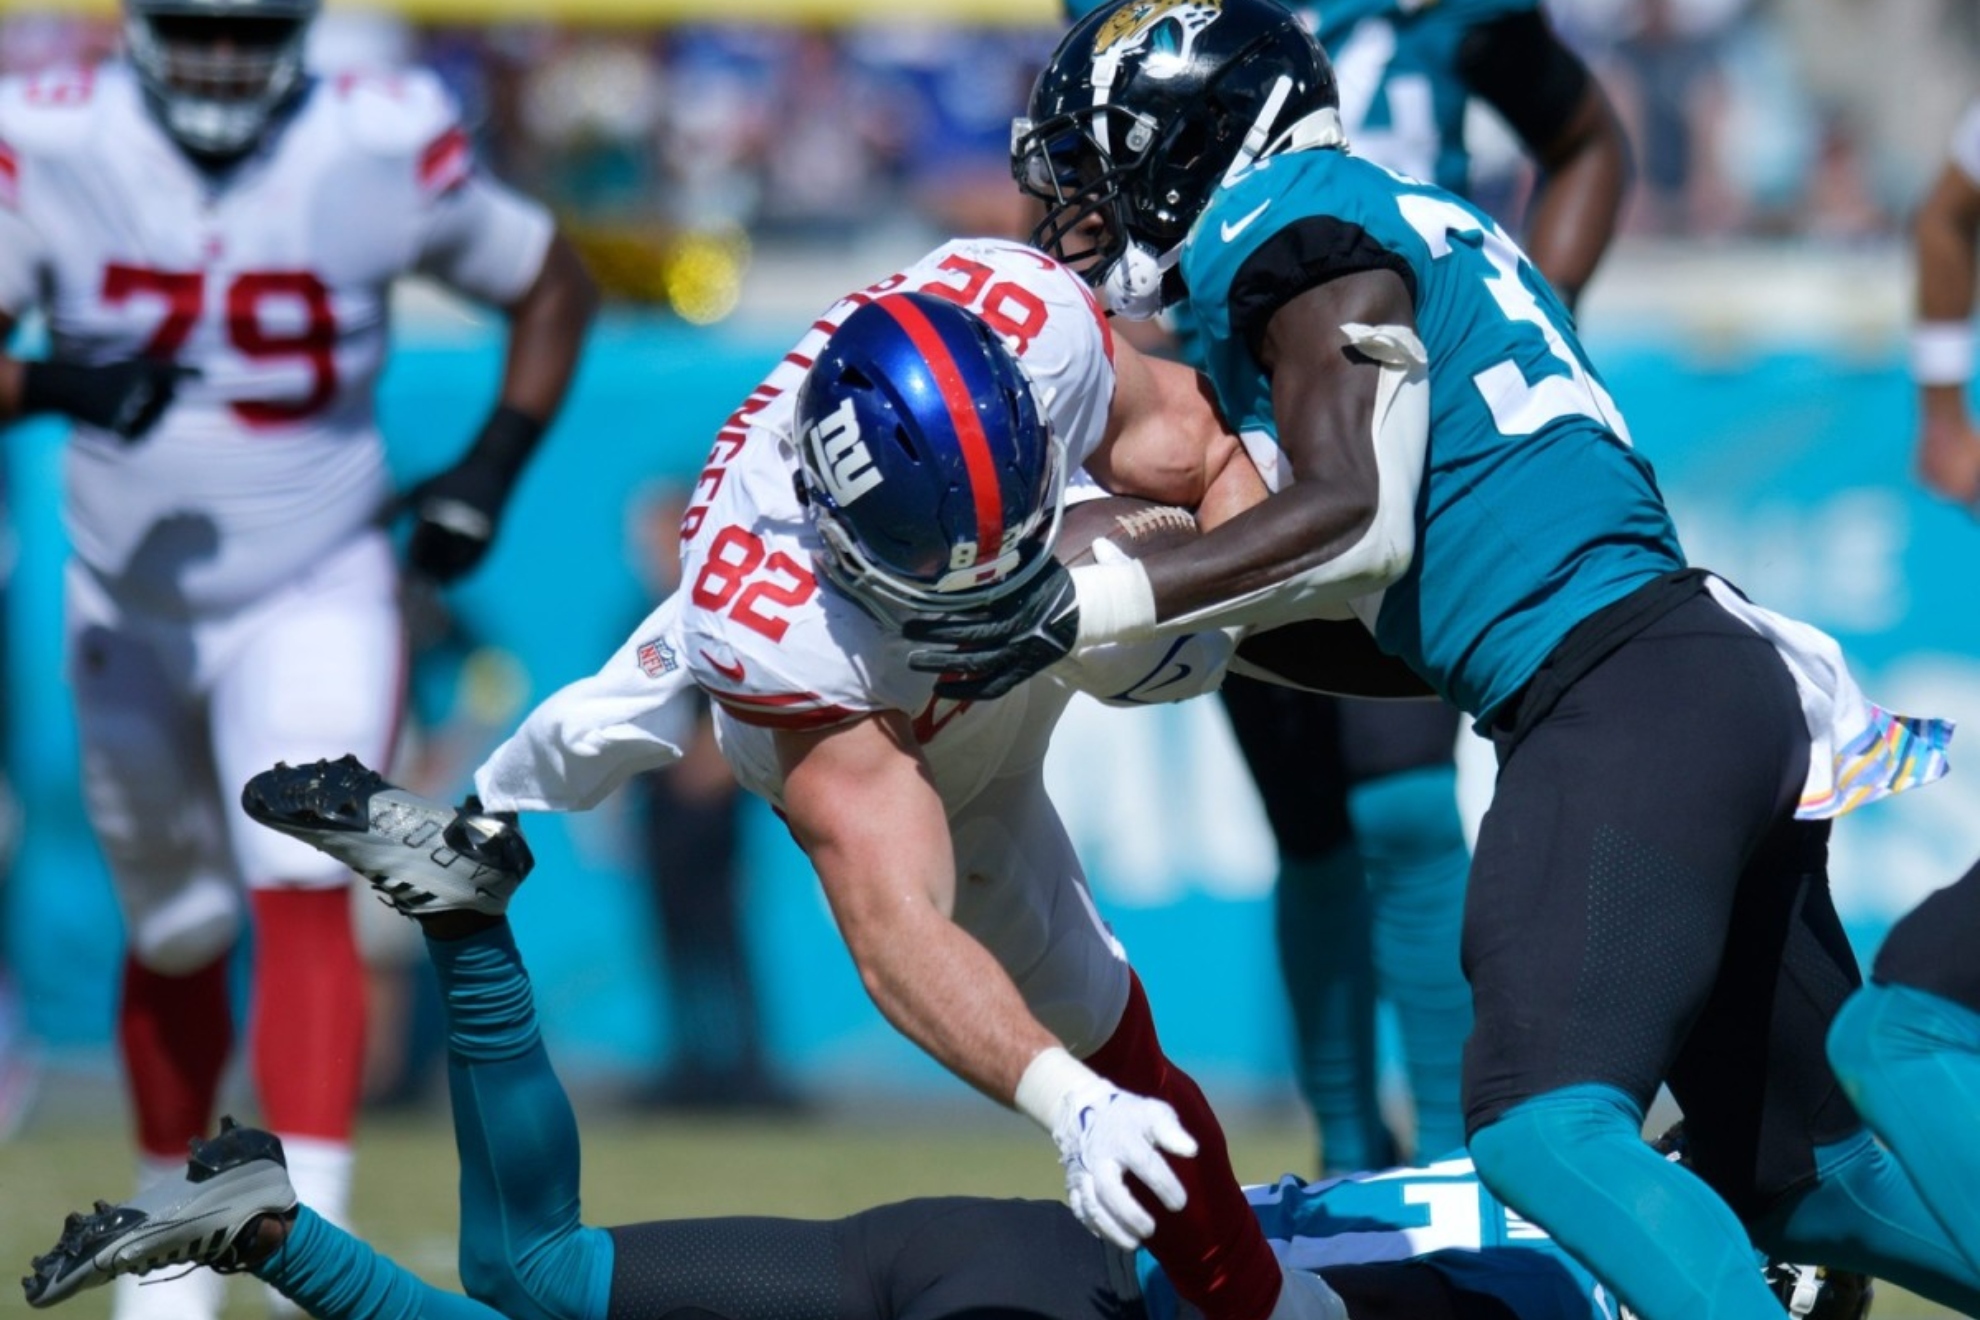 Daniel Bellinger suffered an eye socket injury during the game against the Jaguars